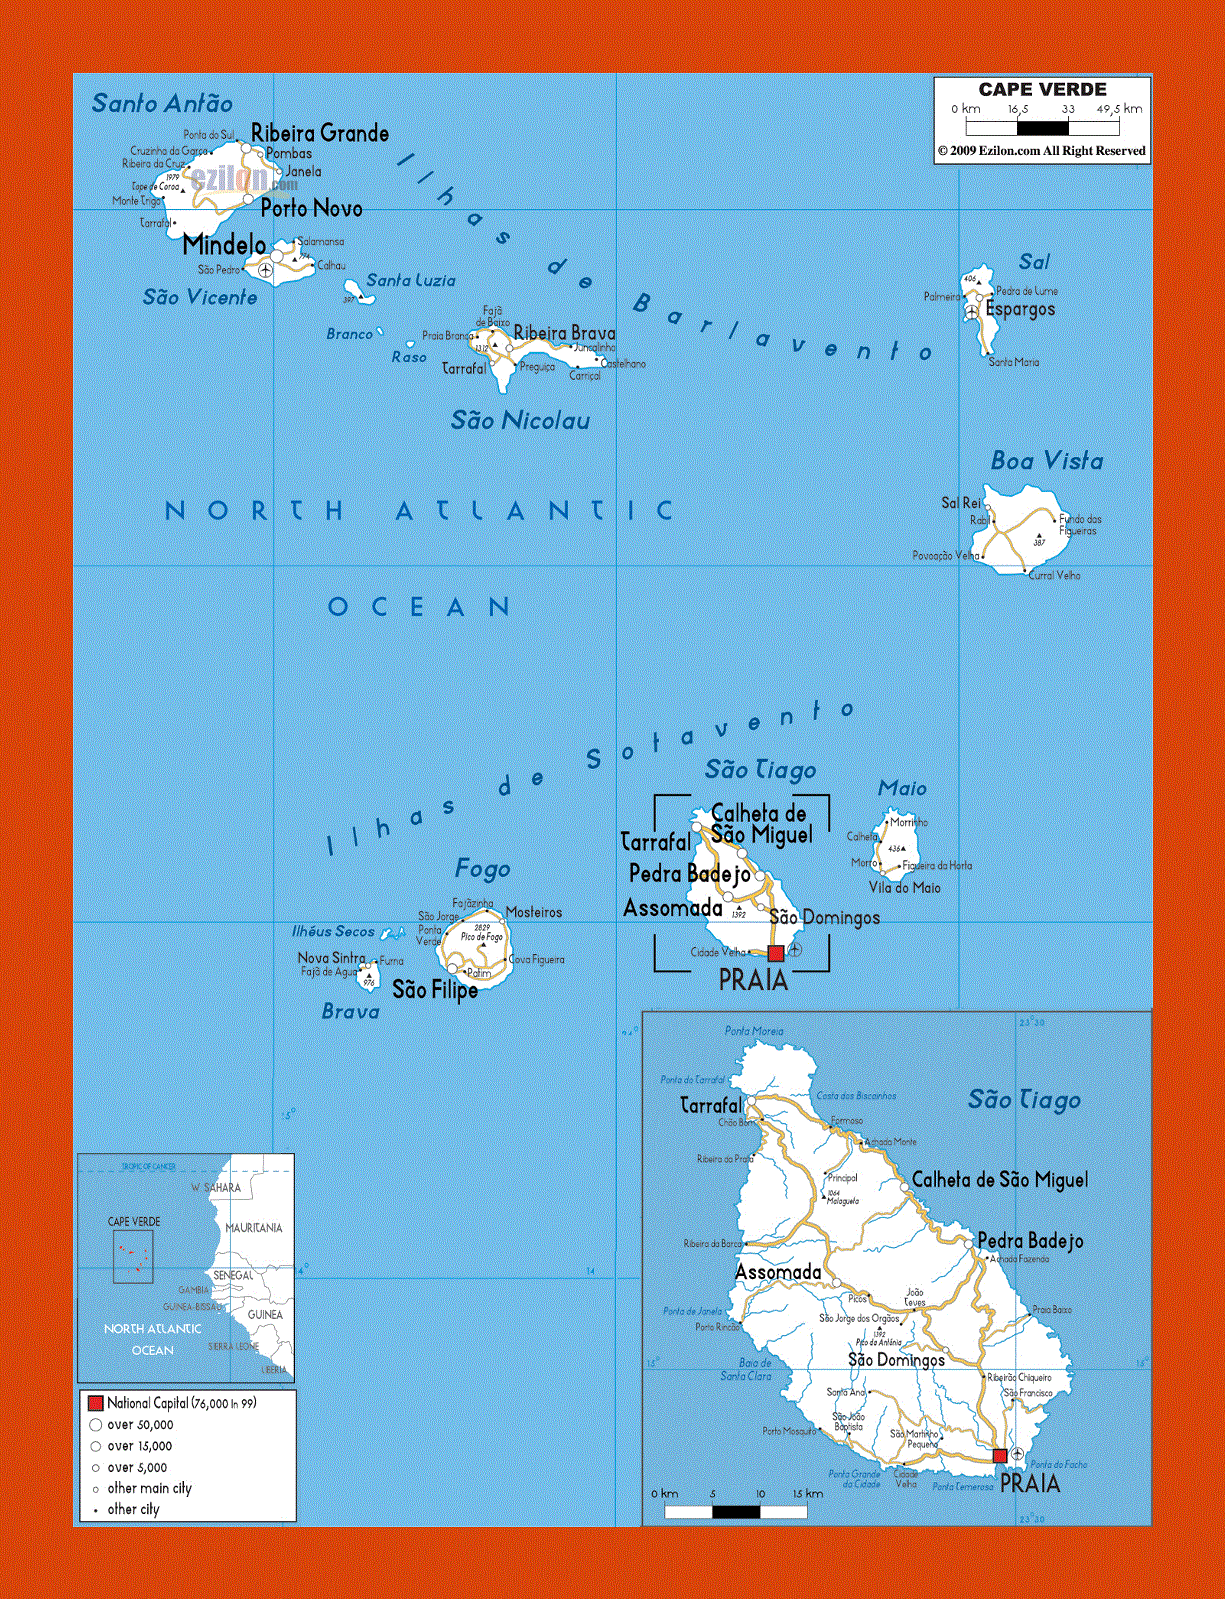 Road map of Cape Verde